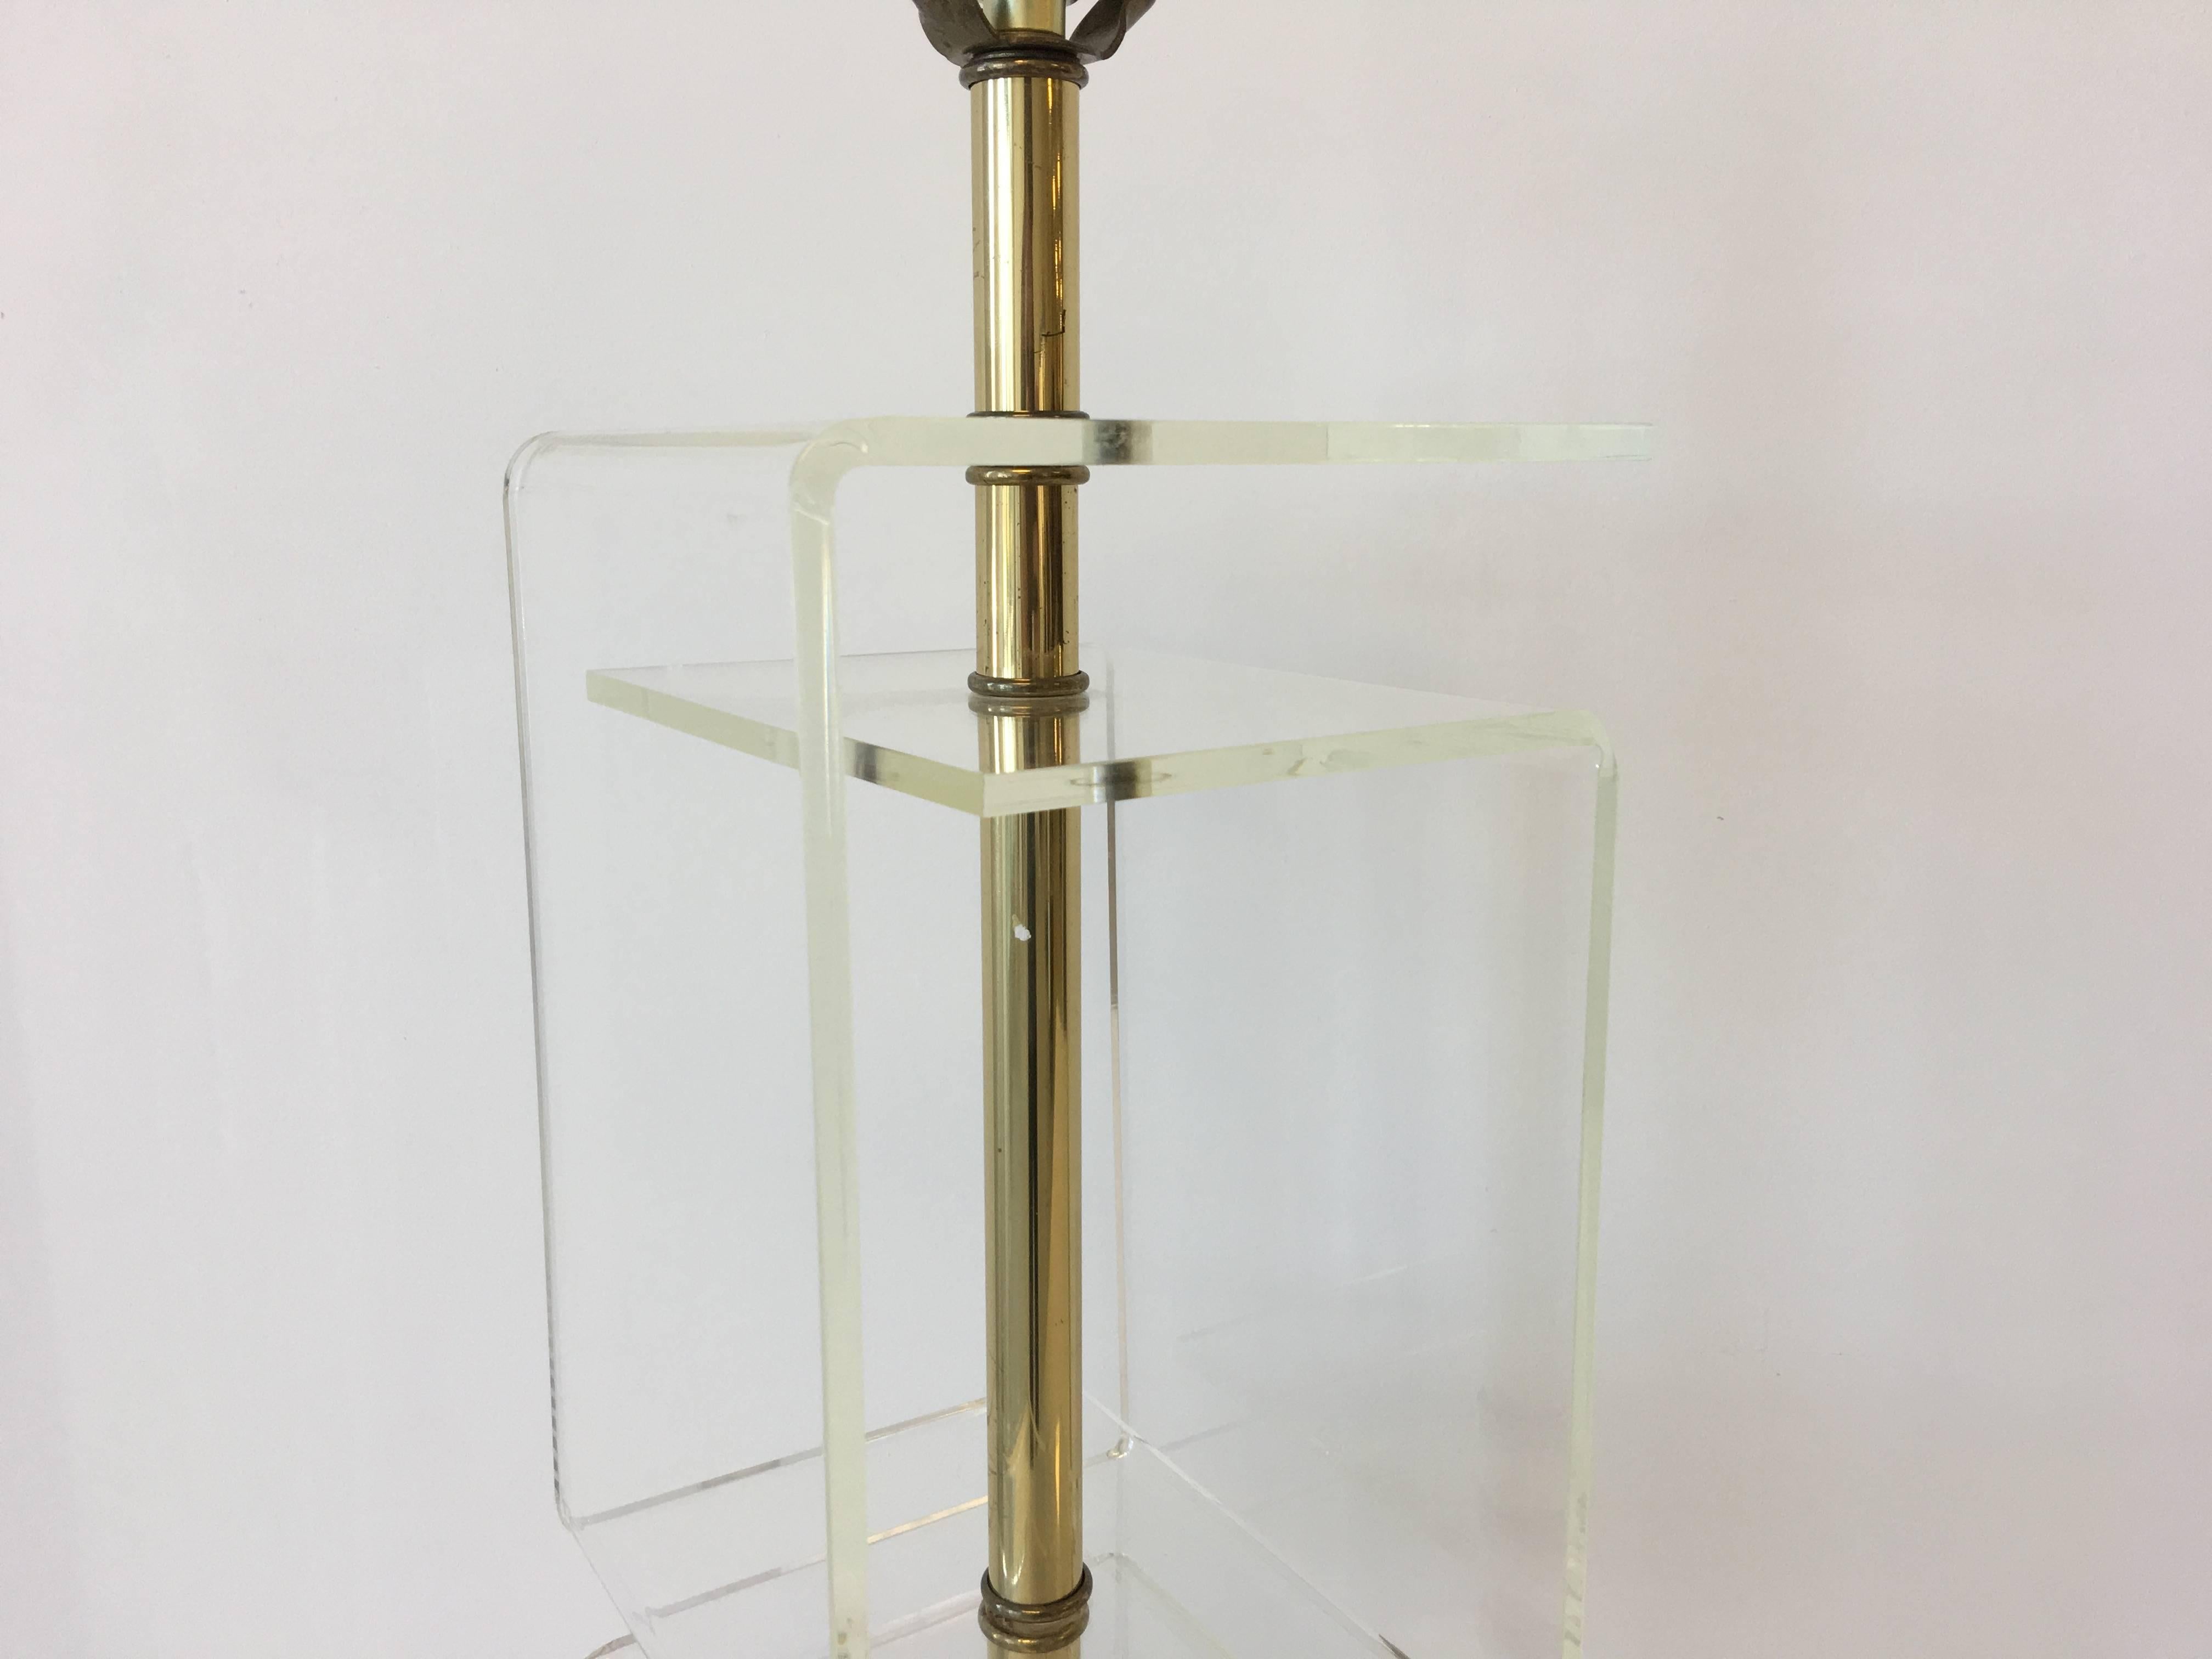 Polished 1960s Mid-Century Modern Lucite and Brass Table Lamp with Greek Key Silhouette